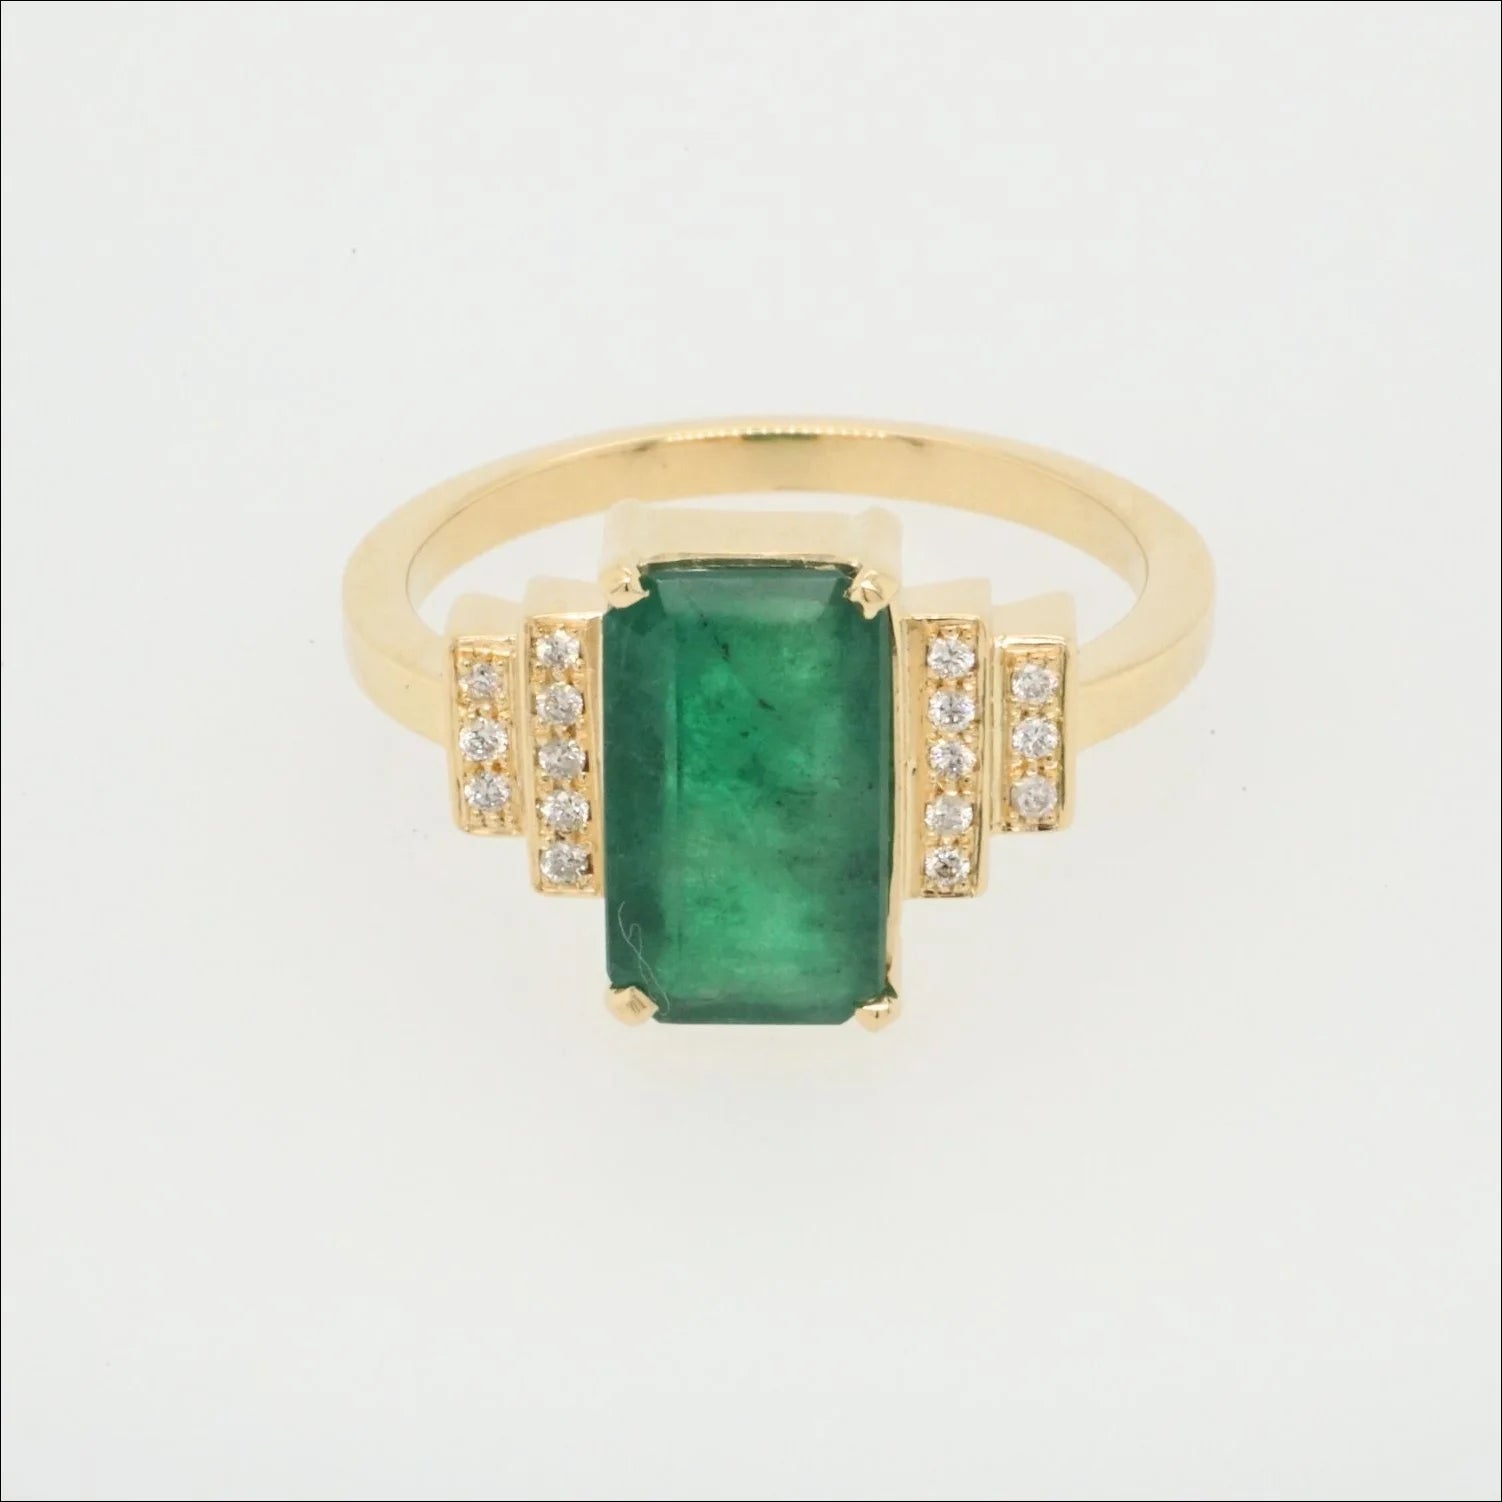 Exquisite 18k Gold Ring with 2.3ct Emerald | Rings